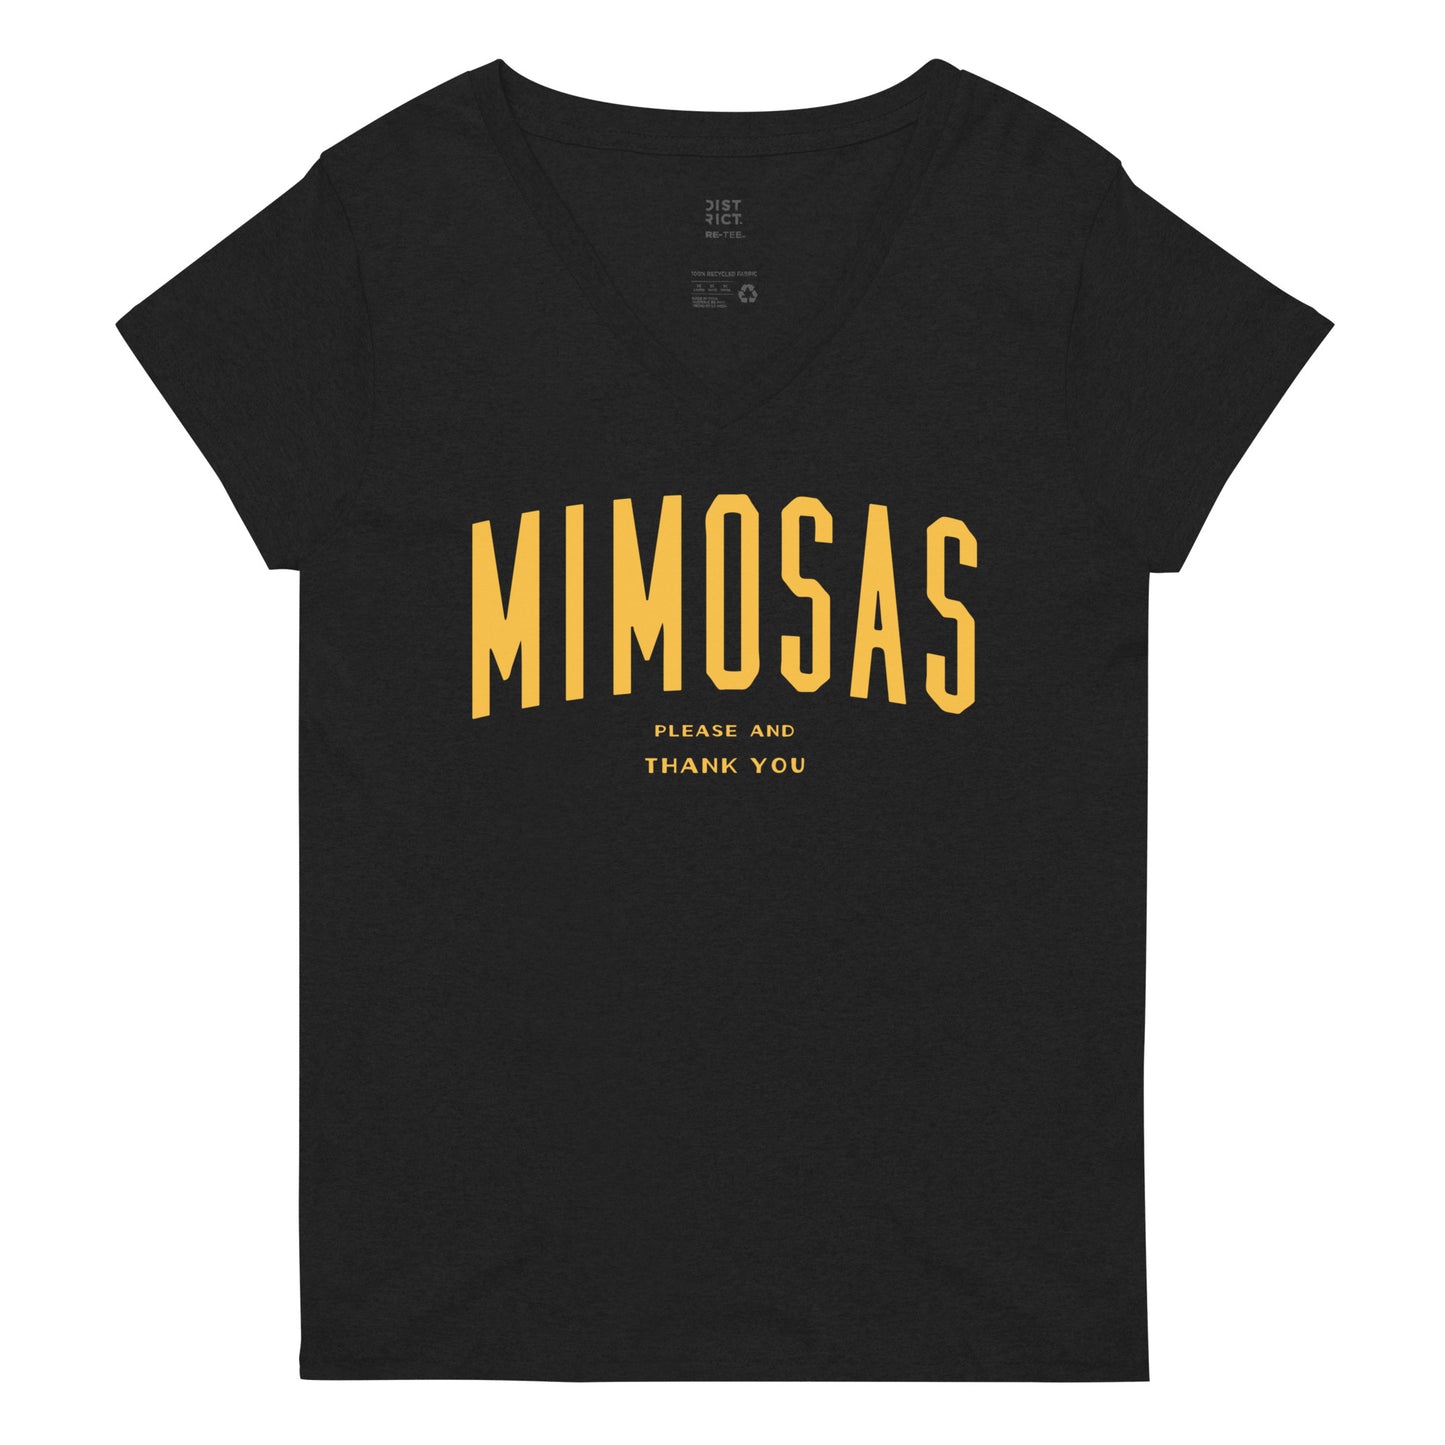 Mimosas Please And Thank You Women's V-Neck Tee